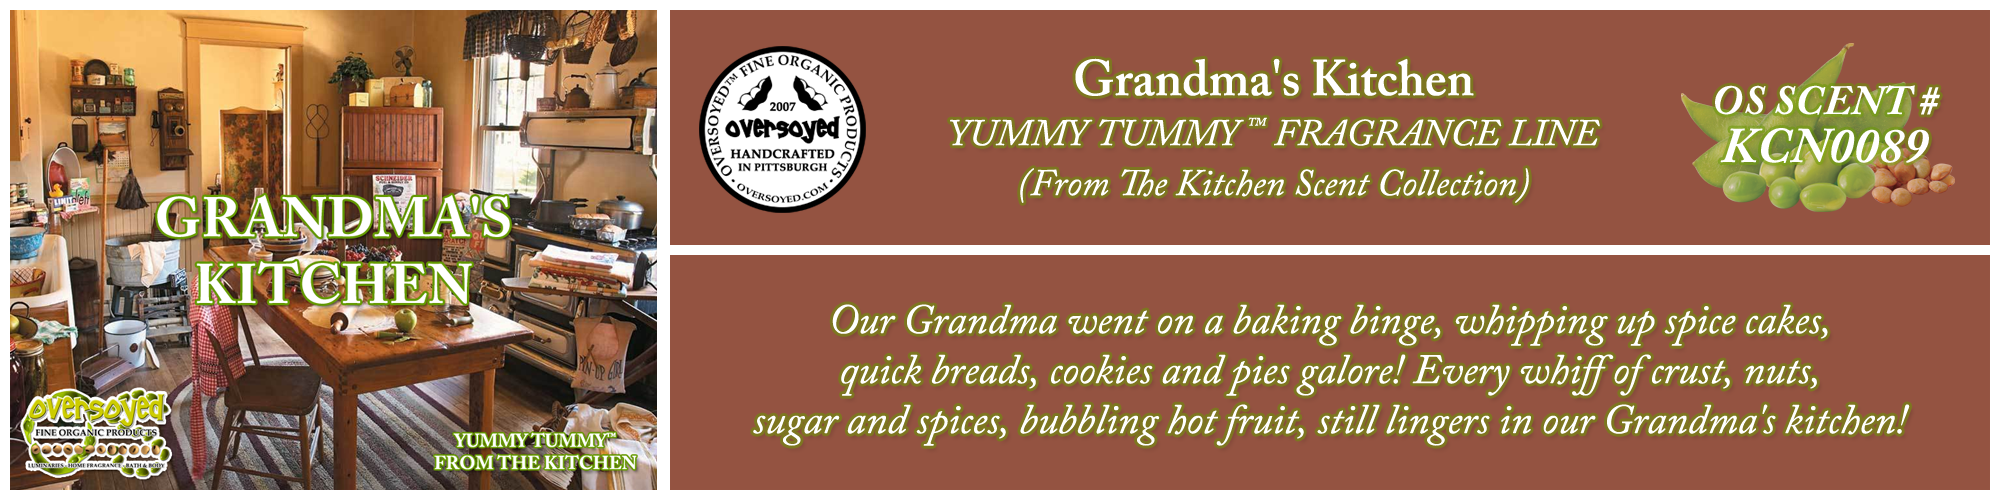 Grandma's Kitchen Handcrafted Products Collection